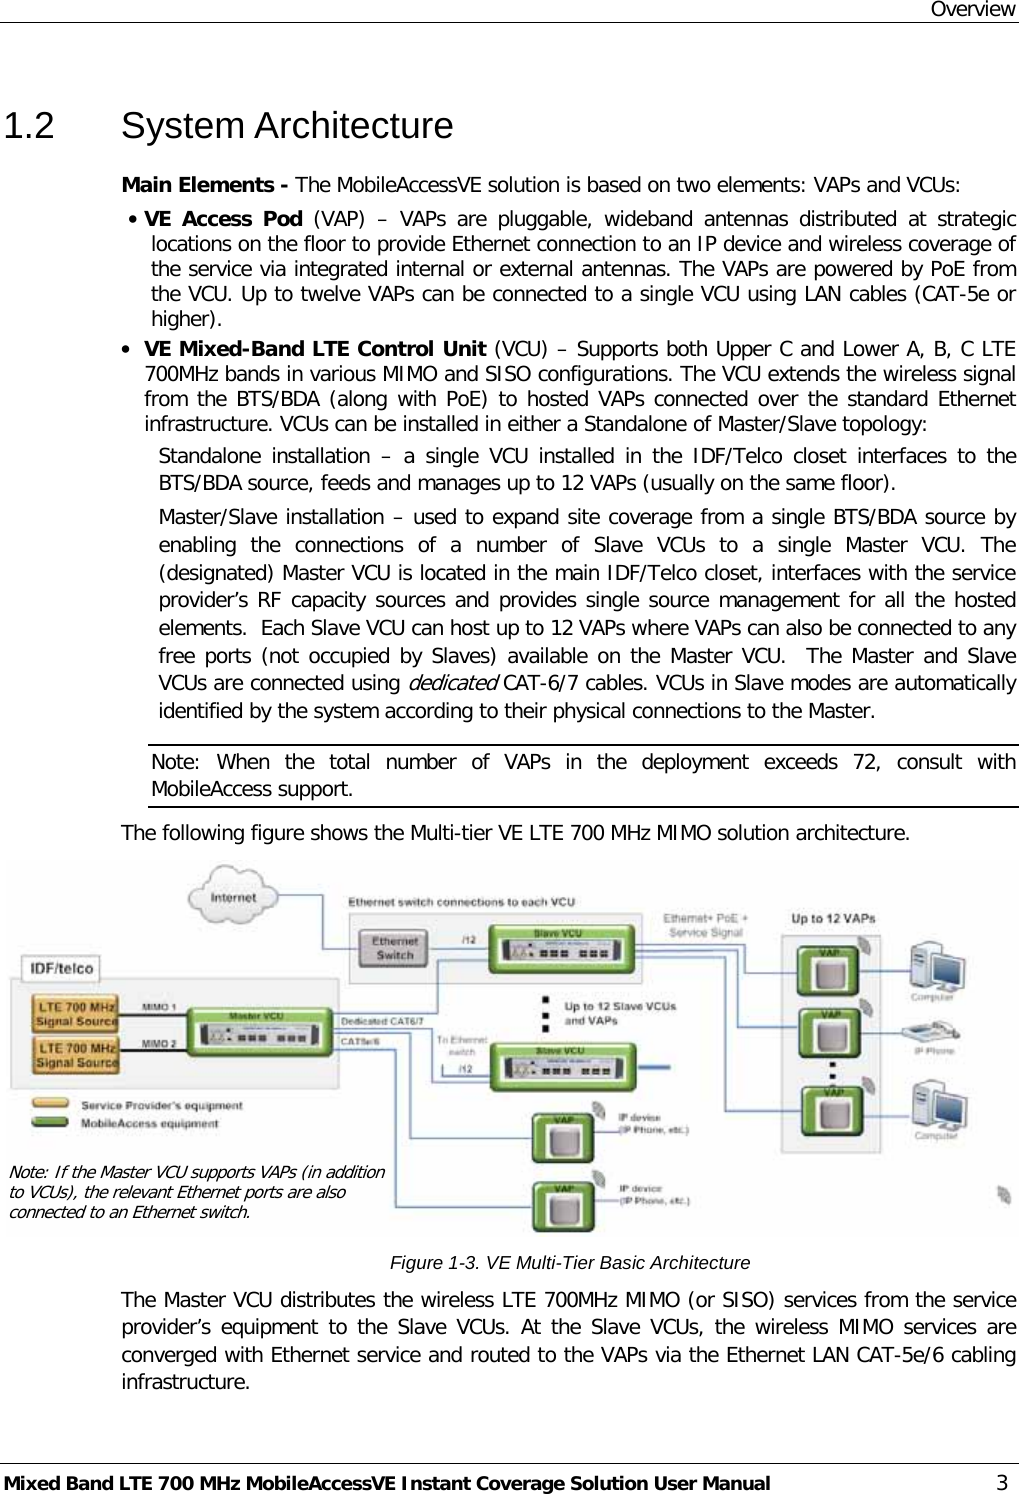 Overview Mixed Band LTE 700 MHz MobileAccessVE Instant Coverage Solution User Manual  3 1.2  System Architecture Main Elements - The MobileAccessVE solution is based on two elements: VAPs and VCUs:   • VE Access Pod (VAP)  –  VAPs are pluggable, wideband antennas distributed at strategic locations on the floor to provide Ethernet connection to an IP device and wireless coverage of the service via integrated internal or external antennas. The VAPs are powered by PoE from the VCU. Up to twelve VAPs can be connected to a single VCU using LAN cables (CAT-5e or higher). • VE Mixed-Band LTE Control Unit (VCU) – Supports both Upper C and Lower A, B, C LTE 700MHz bands in various MIMO and SISO configurations. The VCU extends the wireless signal from the BTS/BDA (along with PoE) to hosted VAPs connected over the standard Ethernet infrastructure. VCUs can be installed in either a Standalone of Master/Slave topology: Standalone installation –  a single VCU installed in the IDF/Telco closet interfaces to the BTS/BDA source, feeds and manages up to 12 VAPs (usually on the same floor). Master/Slave installation – used to expand site coverage from a single BTS/BDA source by enabling the connections of a number of Slave VCUs to a single Master VCU. The (designated) Master VCU is located in the main IDF/Telco closet, interfaces with the service provider’s RF capacity sources and provides single source management for all the hosted elements.  Each Slave VCU can host up to 12 VAPs where VAPs can also be connected to any free ports (not occupied by Slaves) available on the Master VCU.  The Master and Slave VCUs are connected using dedicated CAT-6/7 cables. VCUs in Slave modes are automatically identified by the system according to their physical connections to the Master.  Note:  When the total number of VAPs in the deployment exceeds 72, consult with MobileAccess support. The following figure shows the Multi-tier VE LTE 700 MHz MIMO solution architecture.  Figure  1-3. VE Multi-Tier Basic Architecture The Master VCU distributes the wireless LTE 700MHz MIMO (or SISO) services from the service provider’s equipment to the Slave VCUs. At the Slave  VCUs, the wireless MIMO services are converged with Ethernet service and routed to the VAPs via the Ethernet LAN CAT-5e/6 cabling infrastructure. Note: If the Master VCU supports VAPs (in addition to VCUs), the relevant Ethernet ports are also connected to an Ethernet switch. 